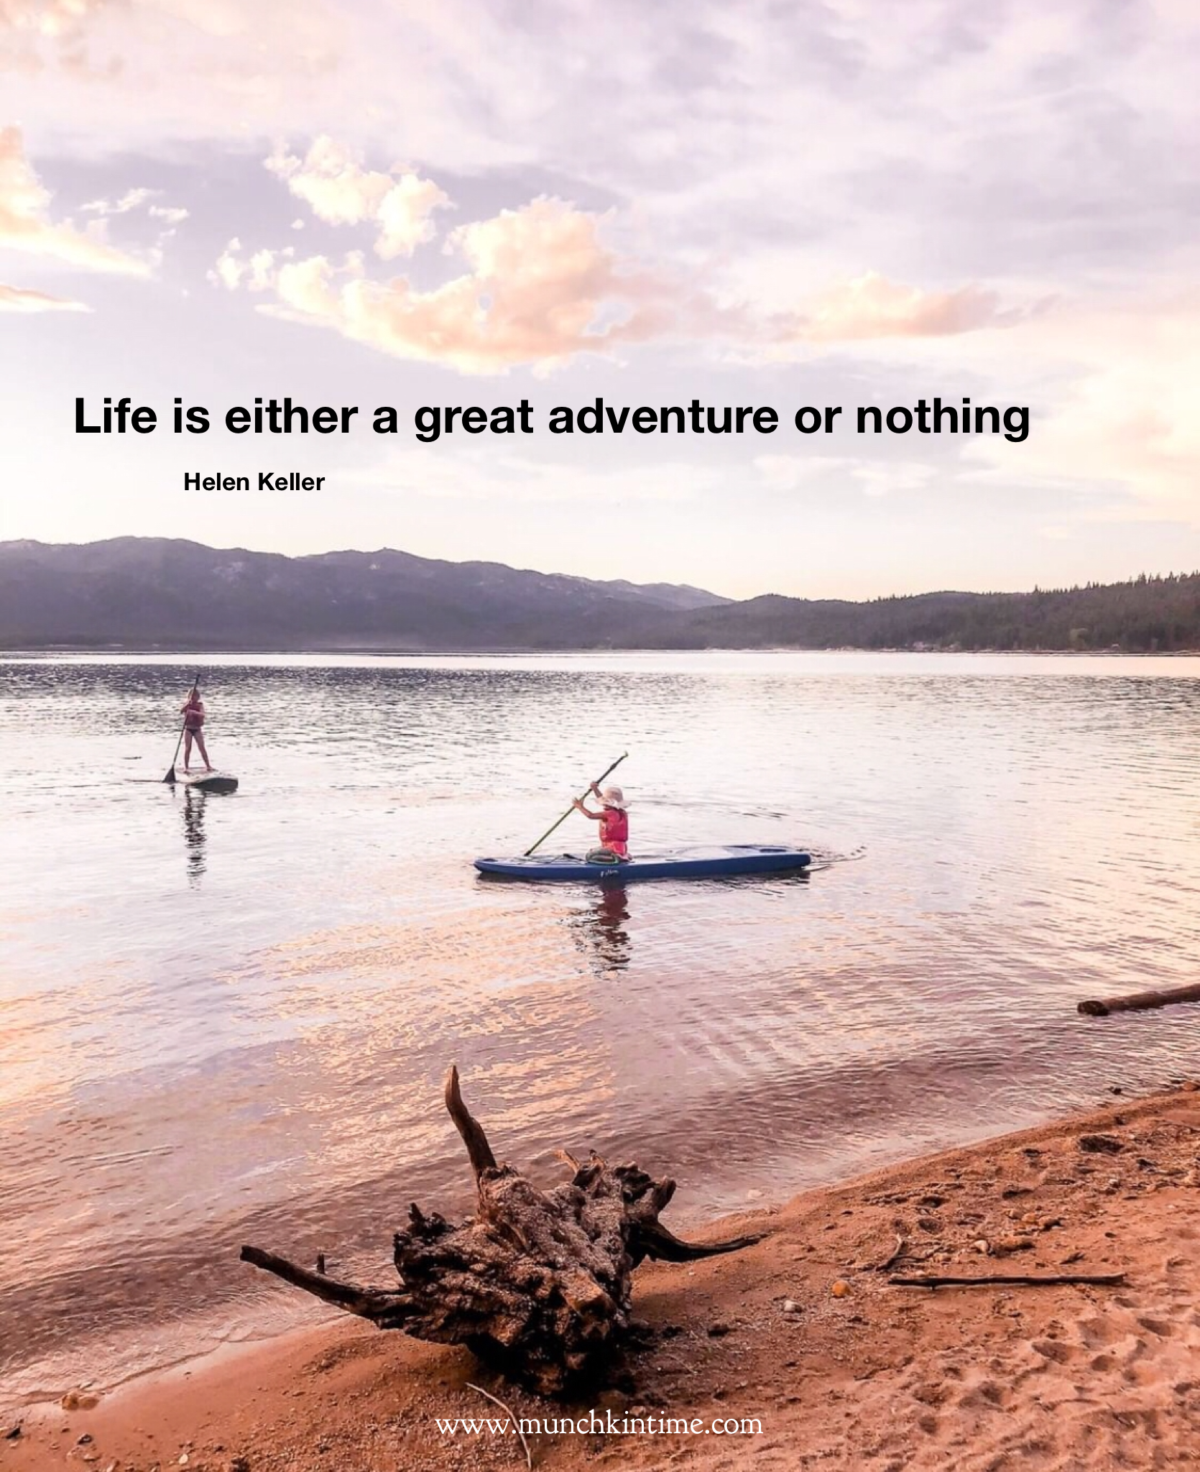 Helen Keller — 'Life is either a daring adventure or nothing at all.'